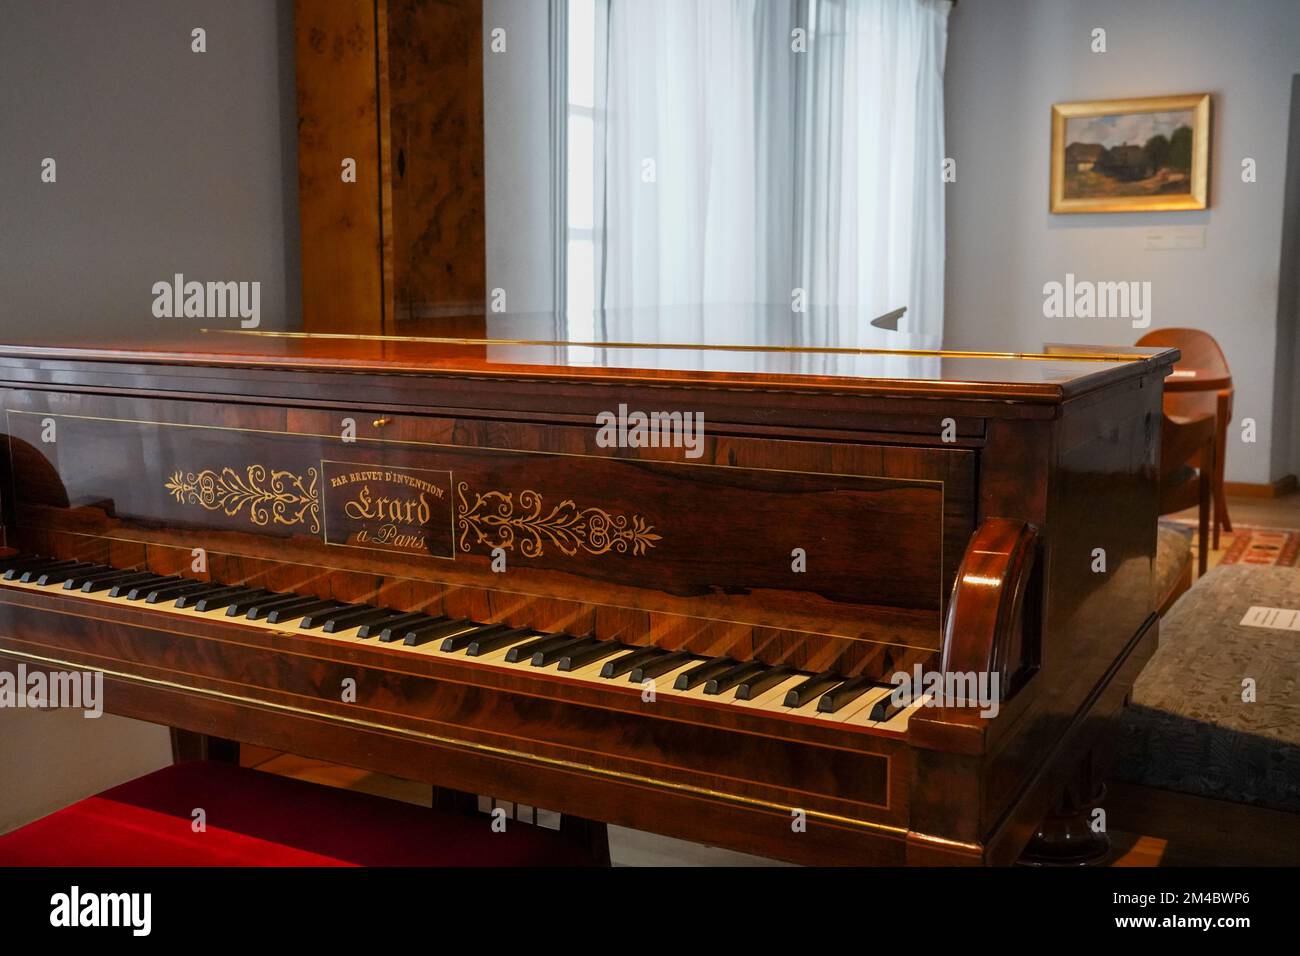 19th century Erard piano in the Birthplace of Frederic Chopin in Zelazowa Wola, Mazovia, Poland. It's used for historically informed performances. Stock Photo